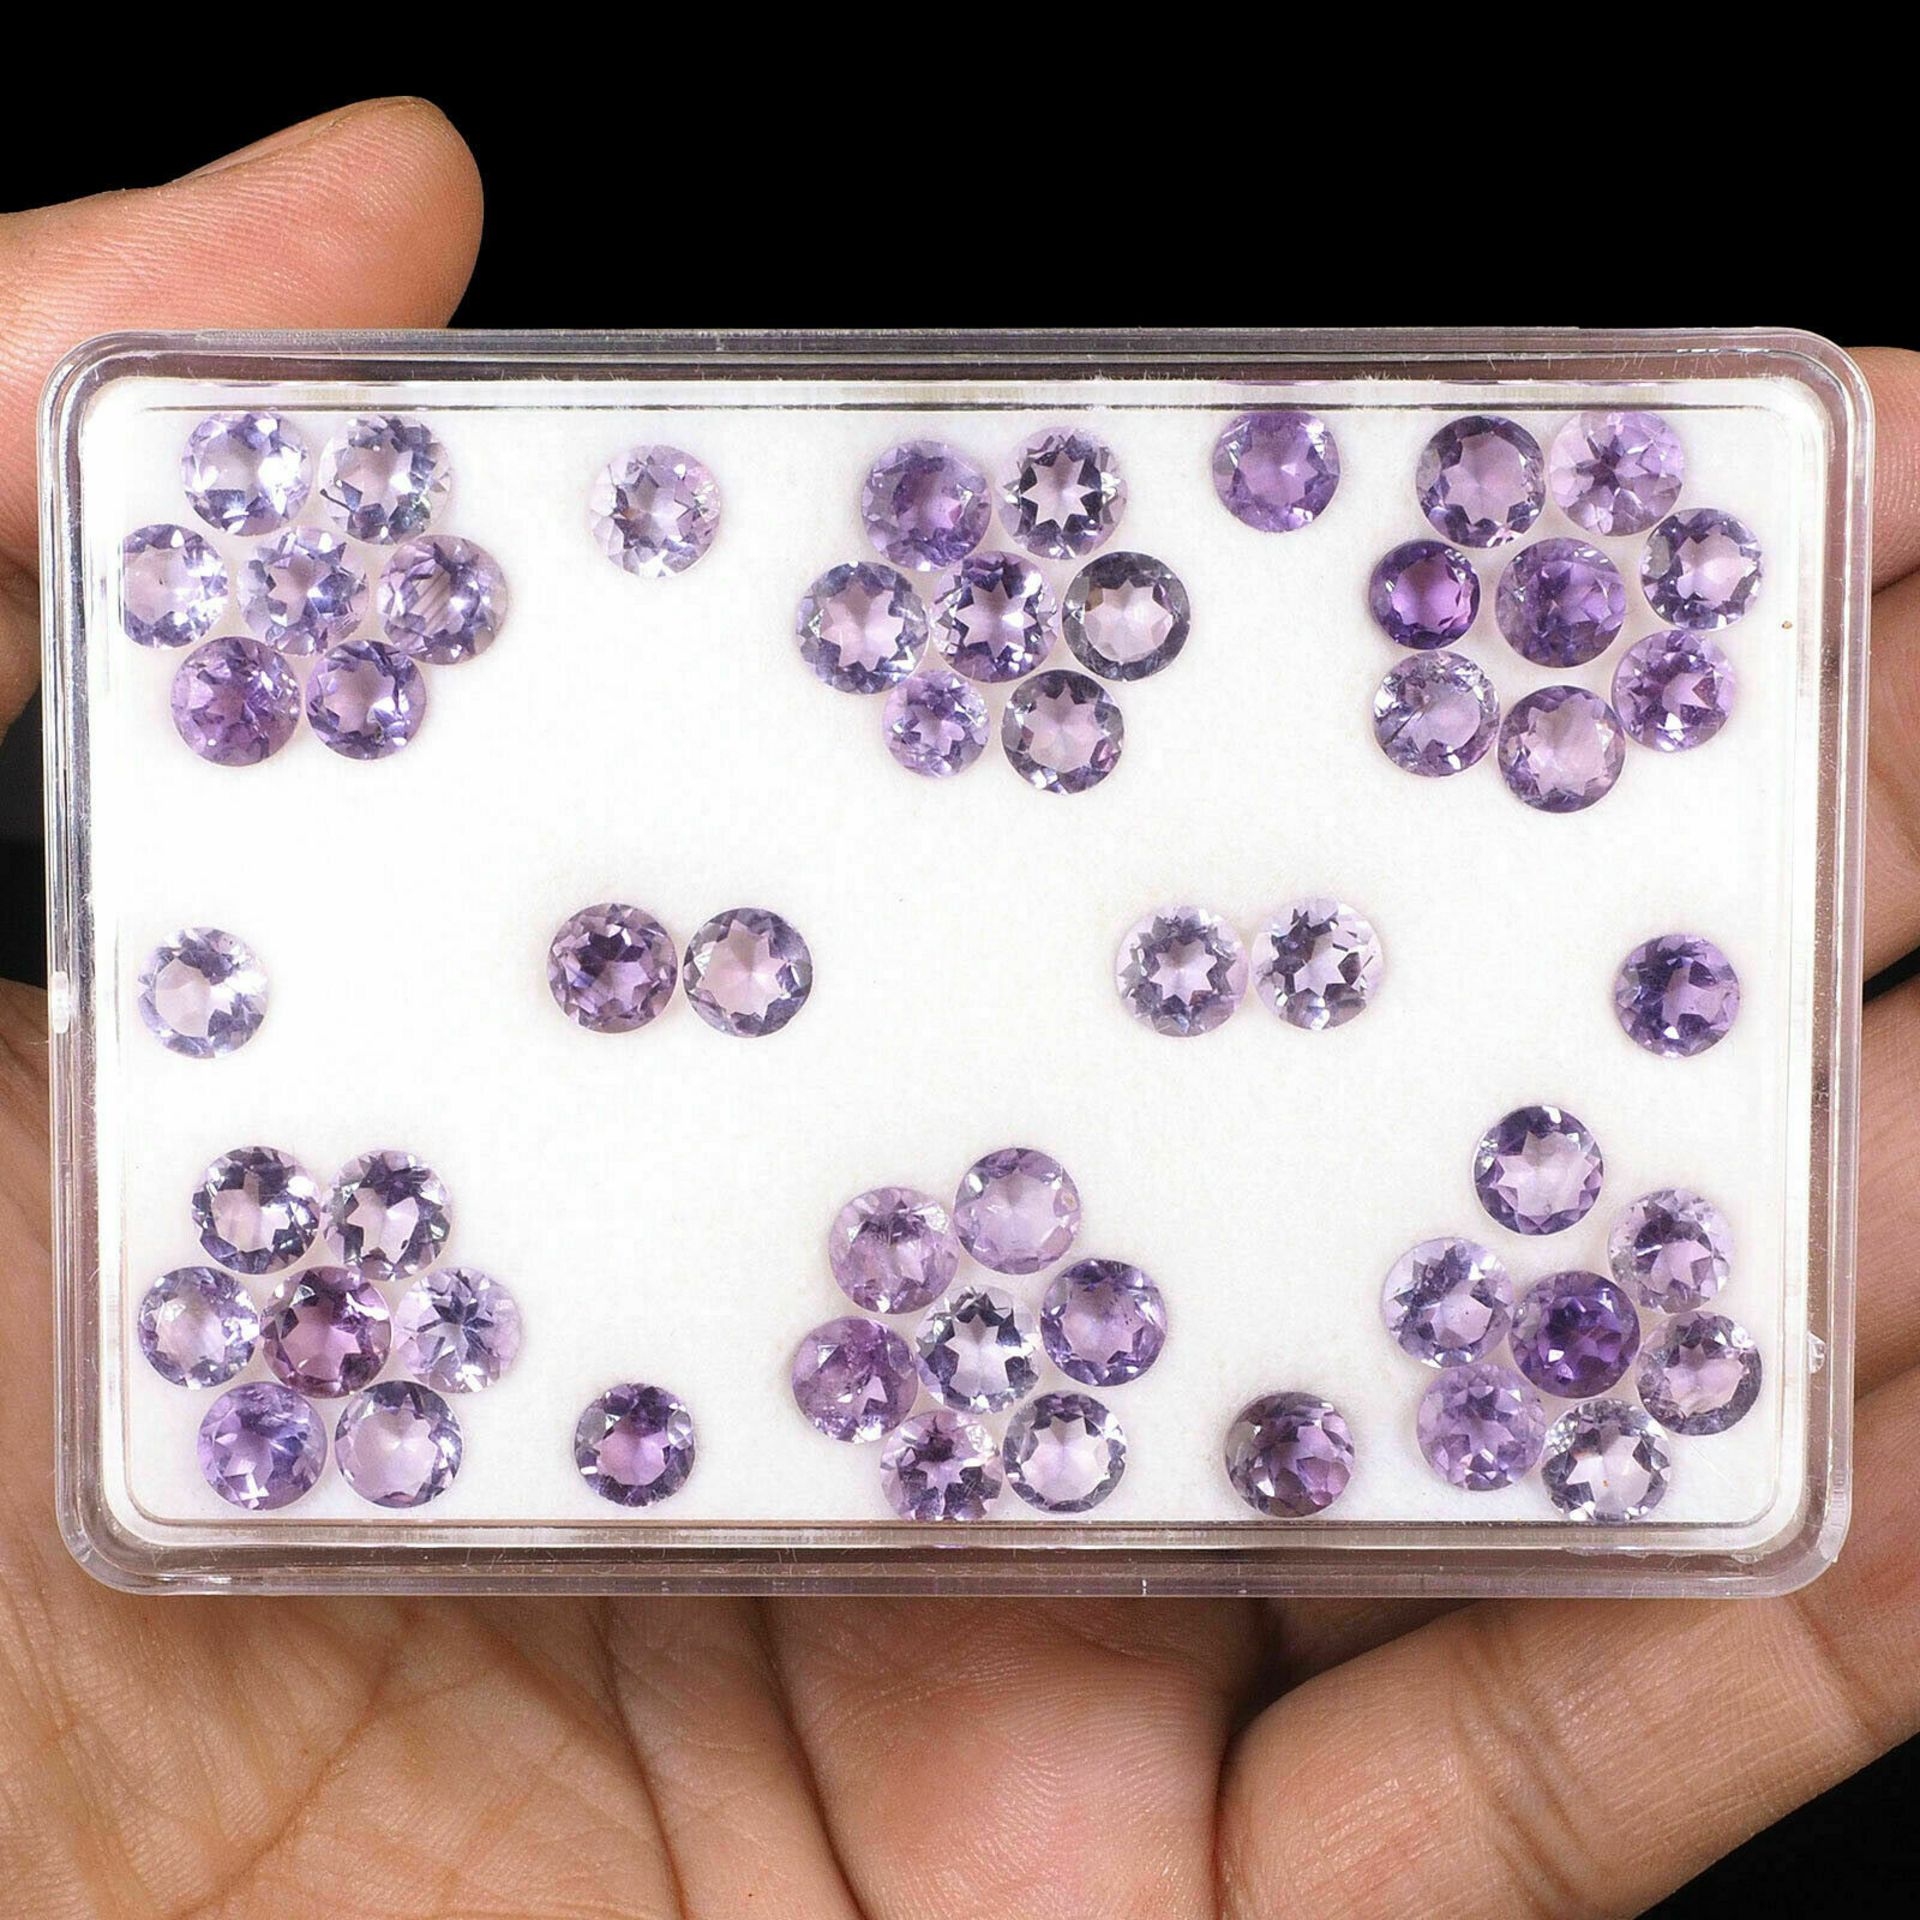 Natural Brazilian Amethyst 40.25 carat 53 pieces, WOW this truly is an amazing collection of natural